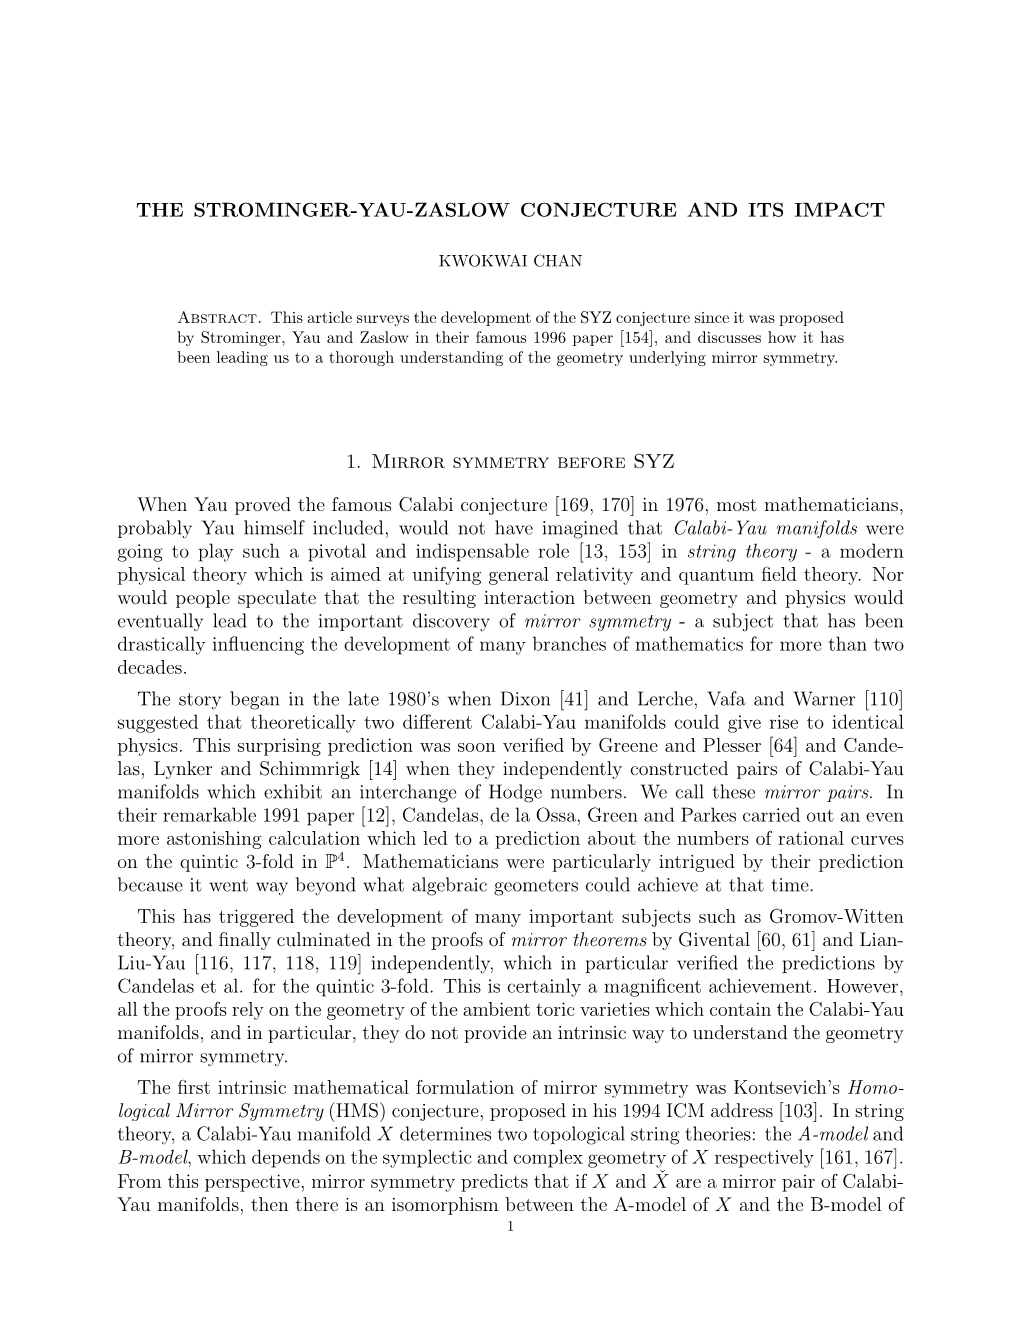 The Strominger-Yau-Zaslow Conjecture and Its Impact